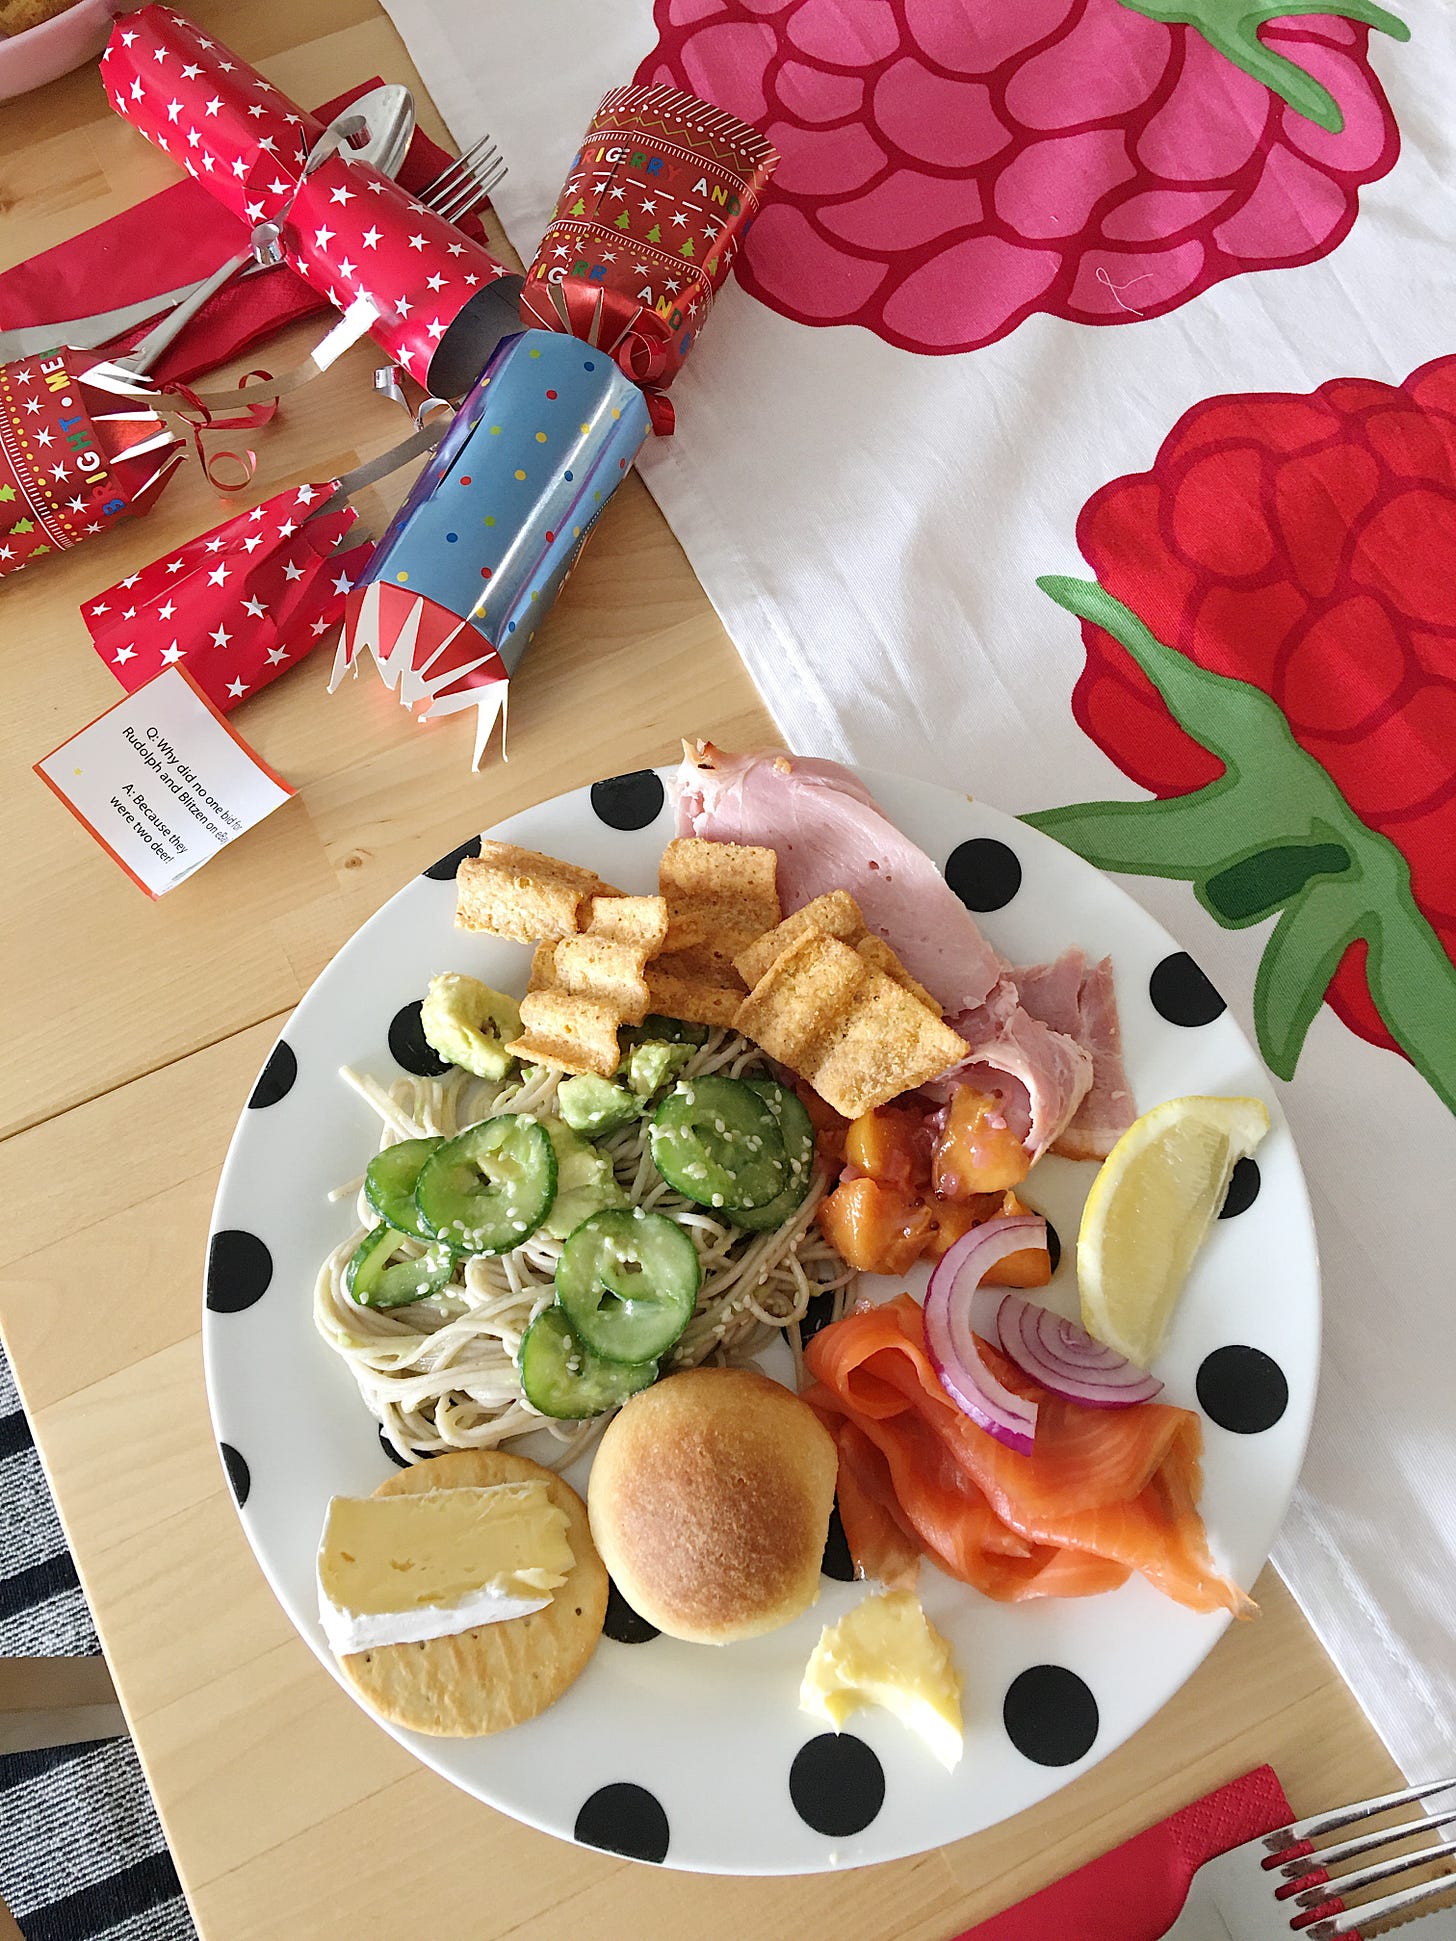 Christmas plate with sliced ham, smoked salmon, grain waves, cheese and crackers and a serving of soba noodle salad. An open Christmas cracker nearby.